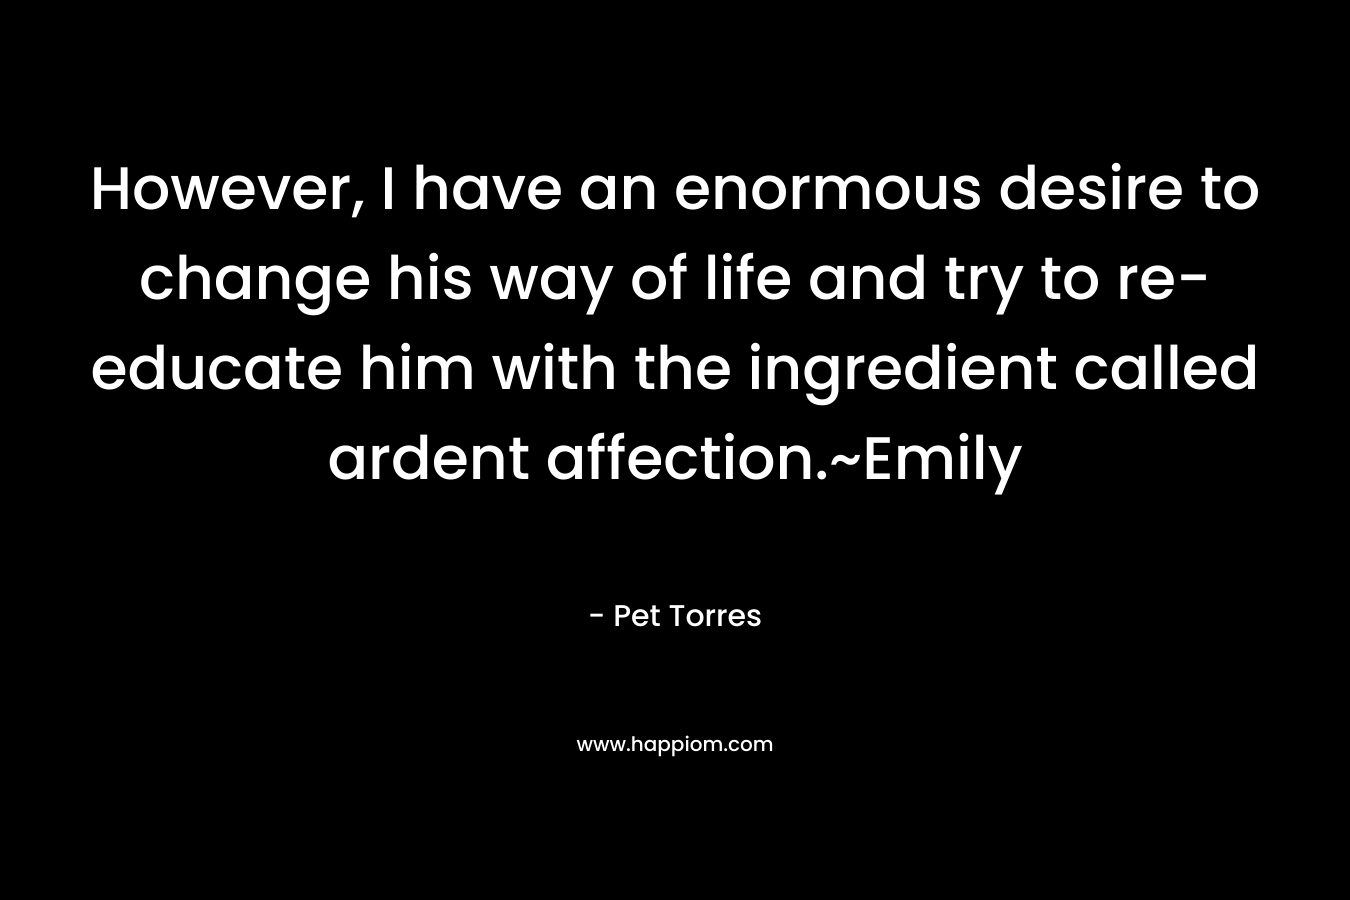 However, I have an enormous desire to change his way of life and try to re-educate him with the ingredient called ardent affection.~Emily – Pet Torres